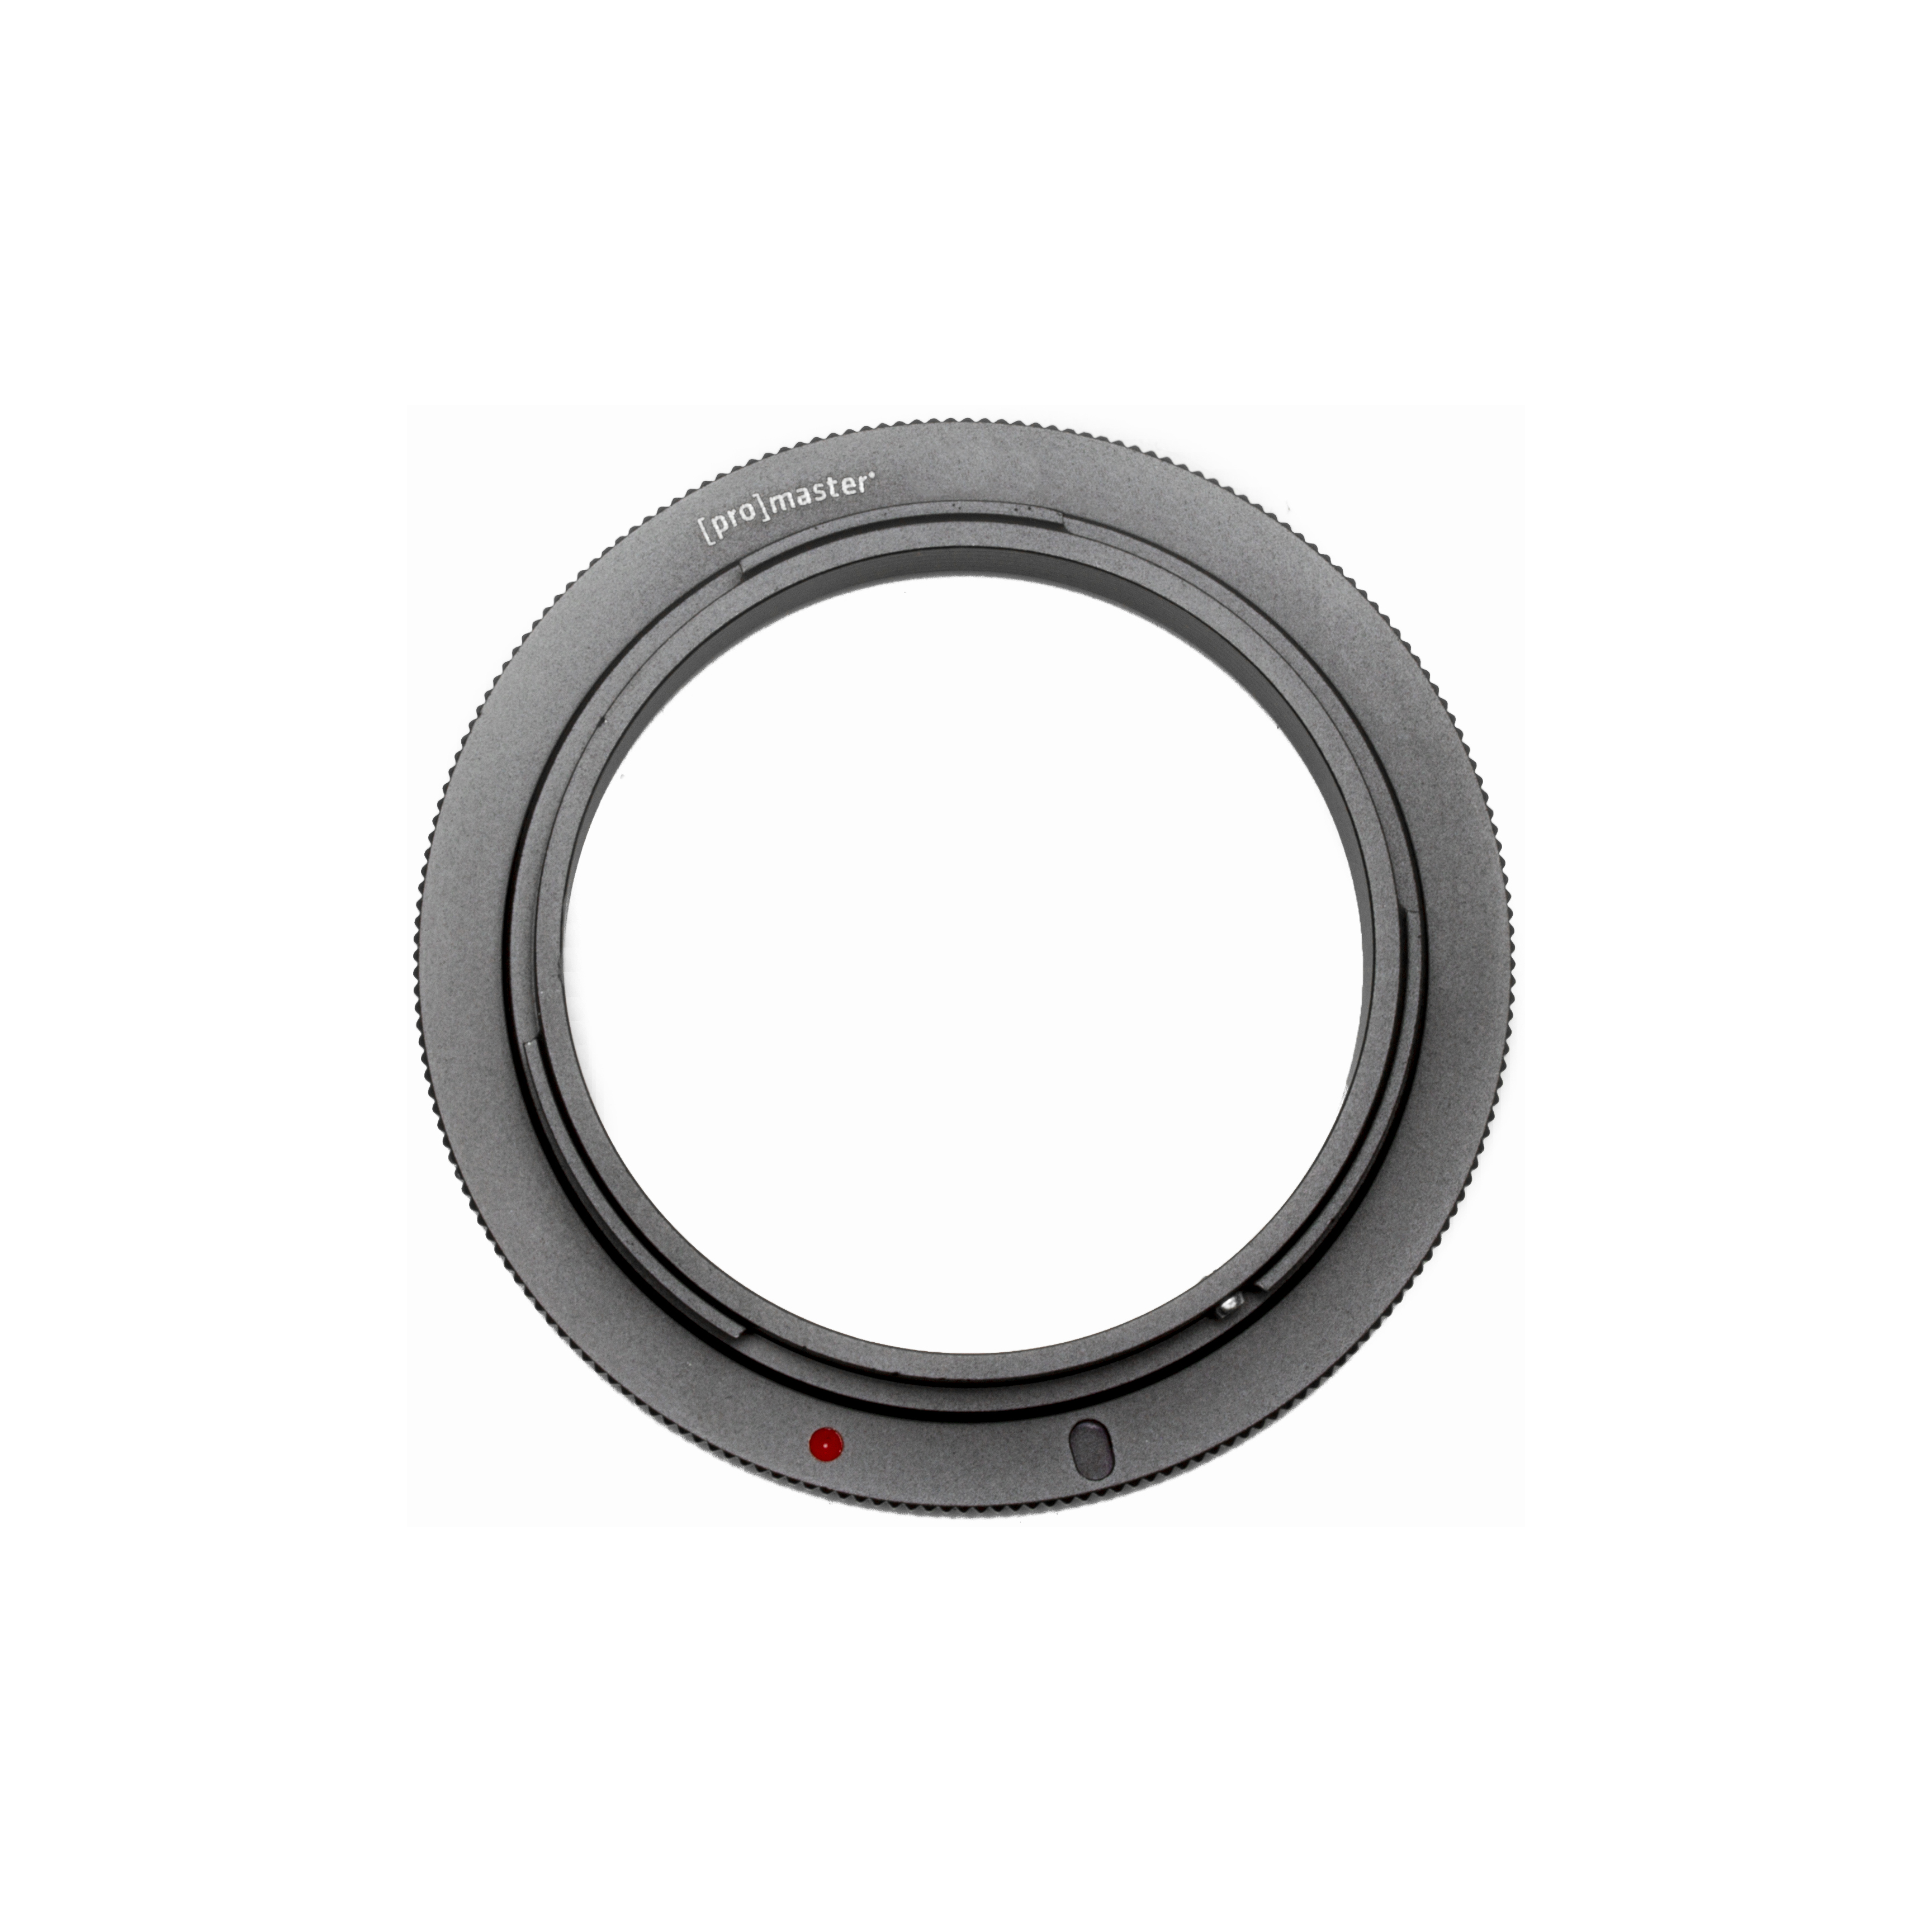 Promaster 6658 Reverse Ring - 67mm Canon